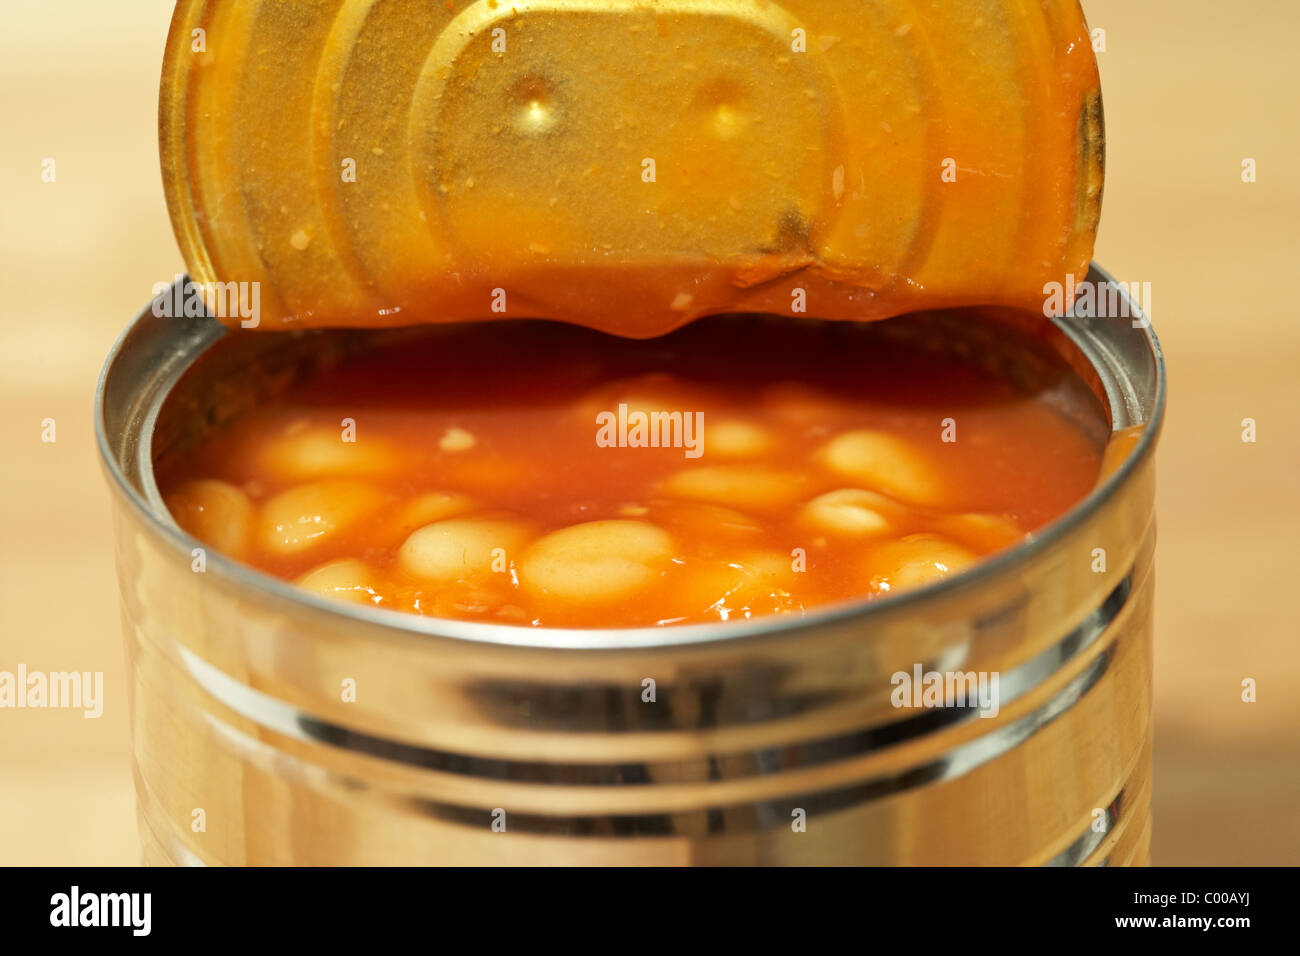 tin can of baked beans in tomato sauce opened with lid peeled back Stock Photo